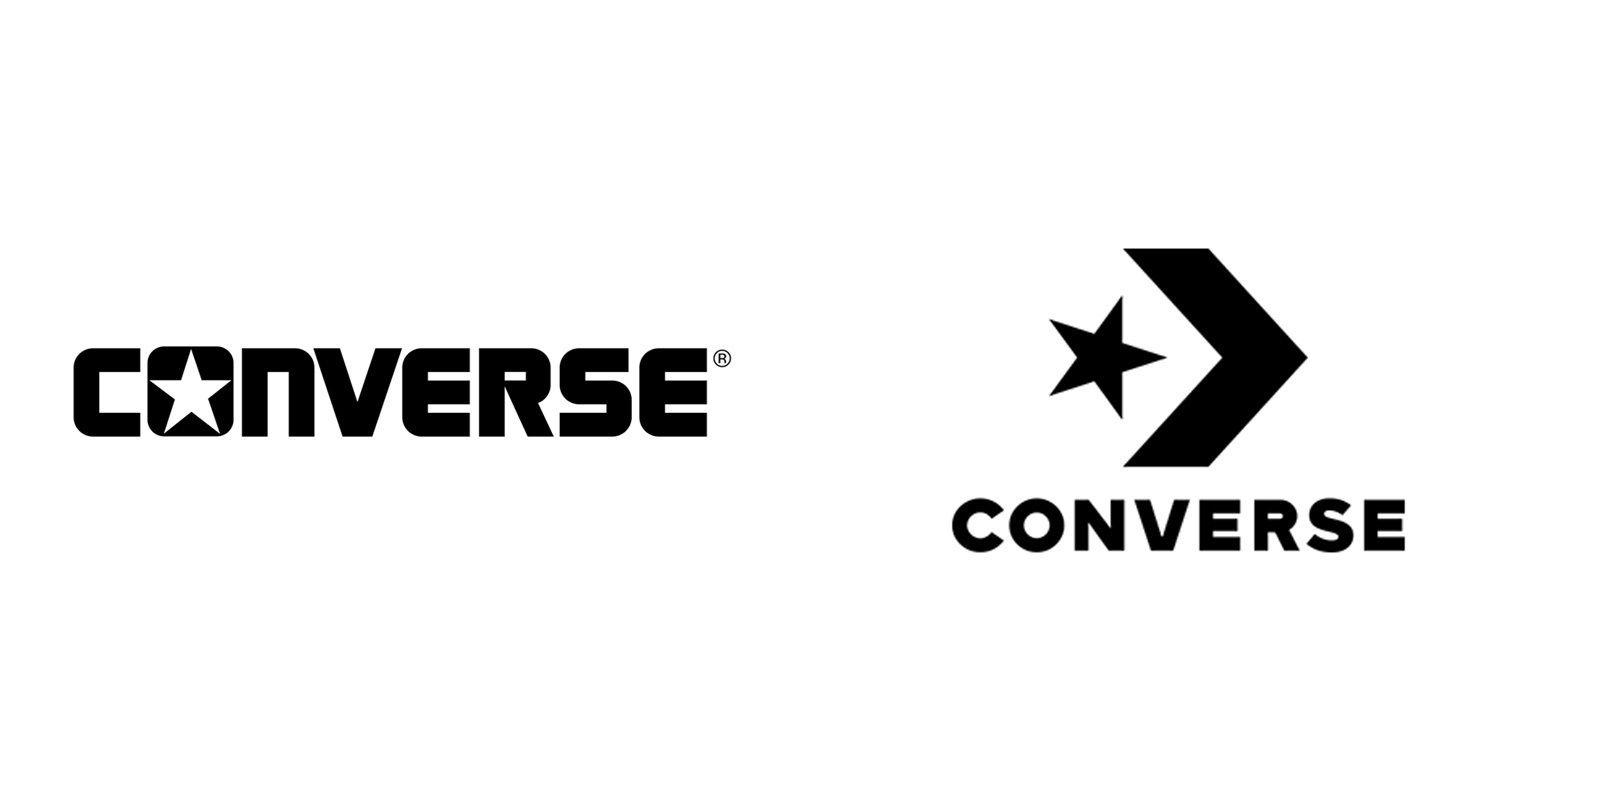 Cool Brand Logo - Converse redesigns logo with heritage in mind